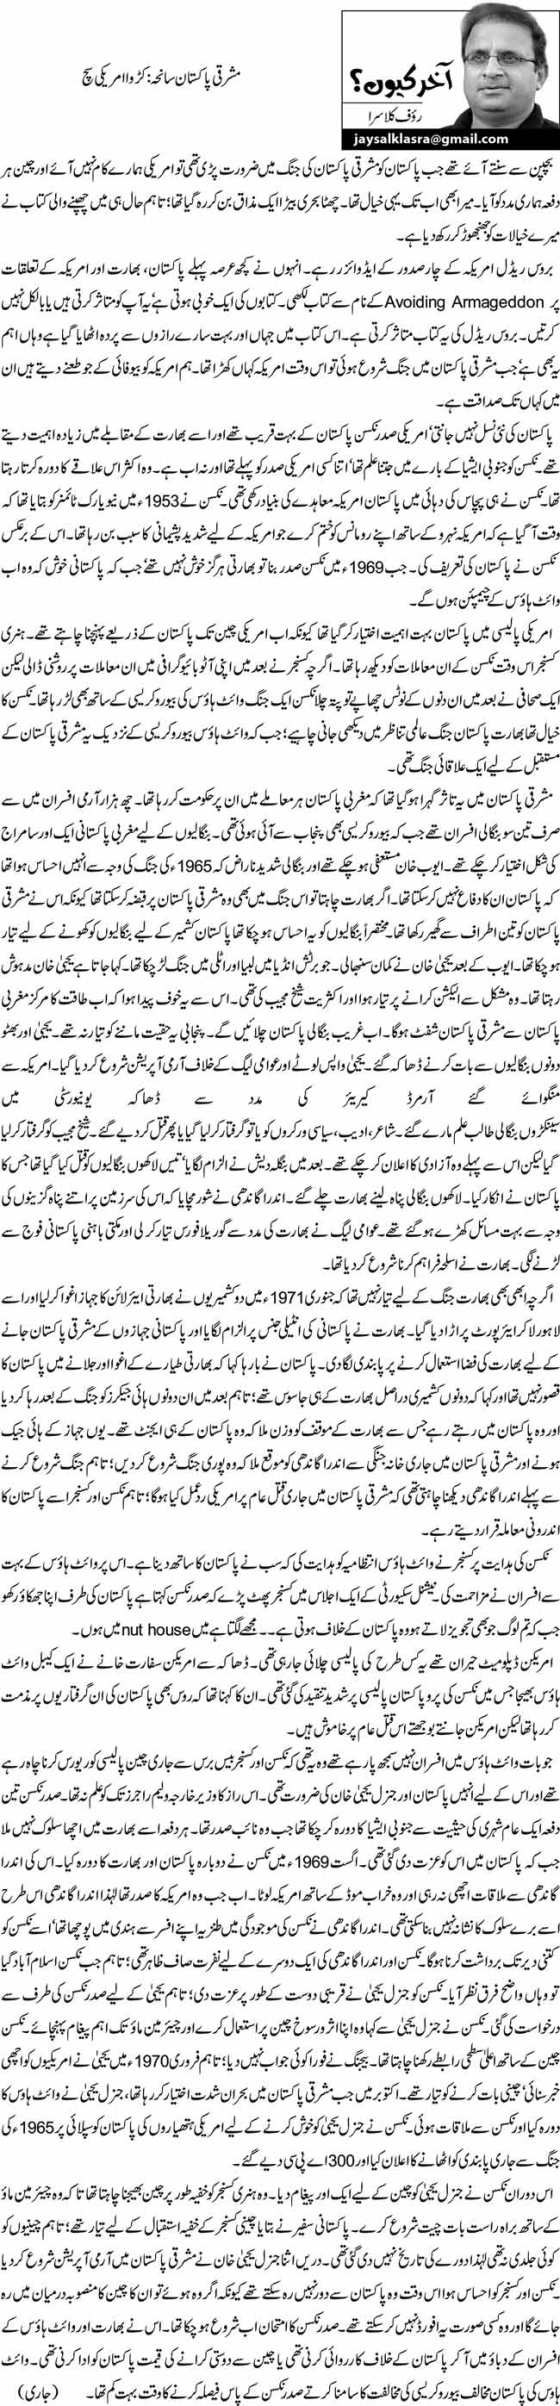 Expr_17-12-14_Tragedy of E-Pakistan_Bitter American Truth